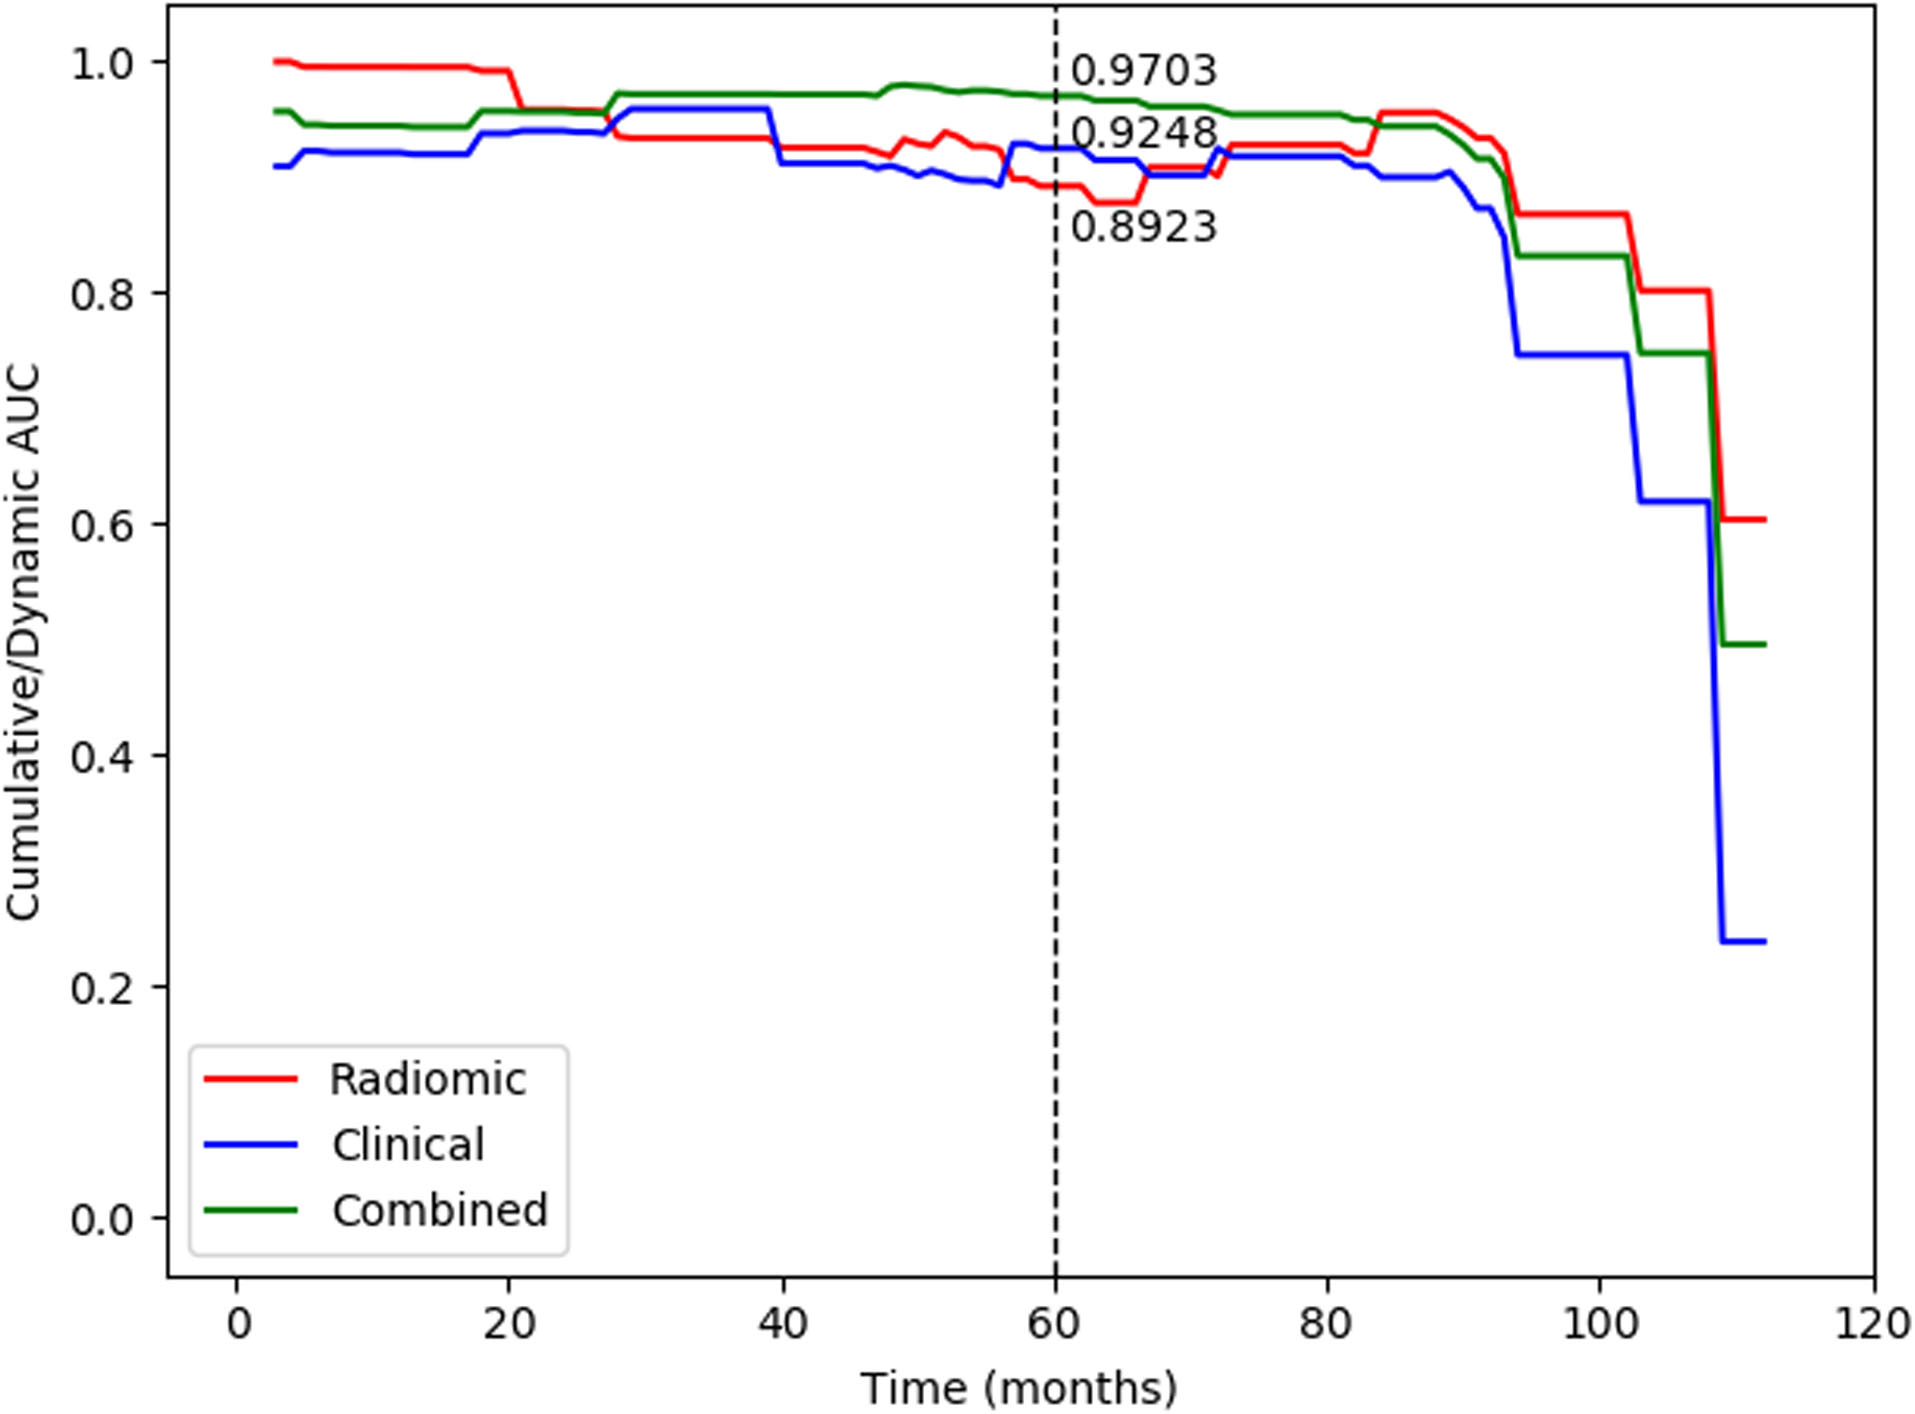 The C/D AUC curve of the radiomic, clinicopathologic, and combined models in the testing dataset. As an indicator to measure the preoperative predictive efficiency of the model in addition to the C-index, the mC/D AUC was further calculated over all time ranges. The curve showed that the combined model achieved the best performance during the research period, and the mC/D AUCs of the radiomic, clinicopathologic and combined models were 0.9146, 0.8645, and 0.9199, respectively. At 60 months after surgery, the preoperative combined model showed a higher predictive value with a C/D AUC60 of 0.9703 compared to 0.9248 in the clinicopathologic model and 0.8923 in the radiomic model (tag line shown). However, the predictive ability was obviously decreased after 100 months.